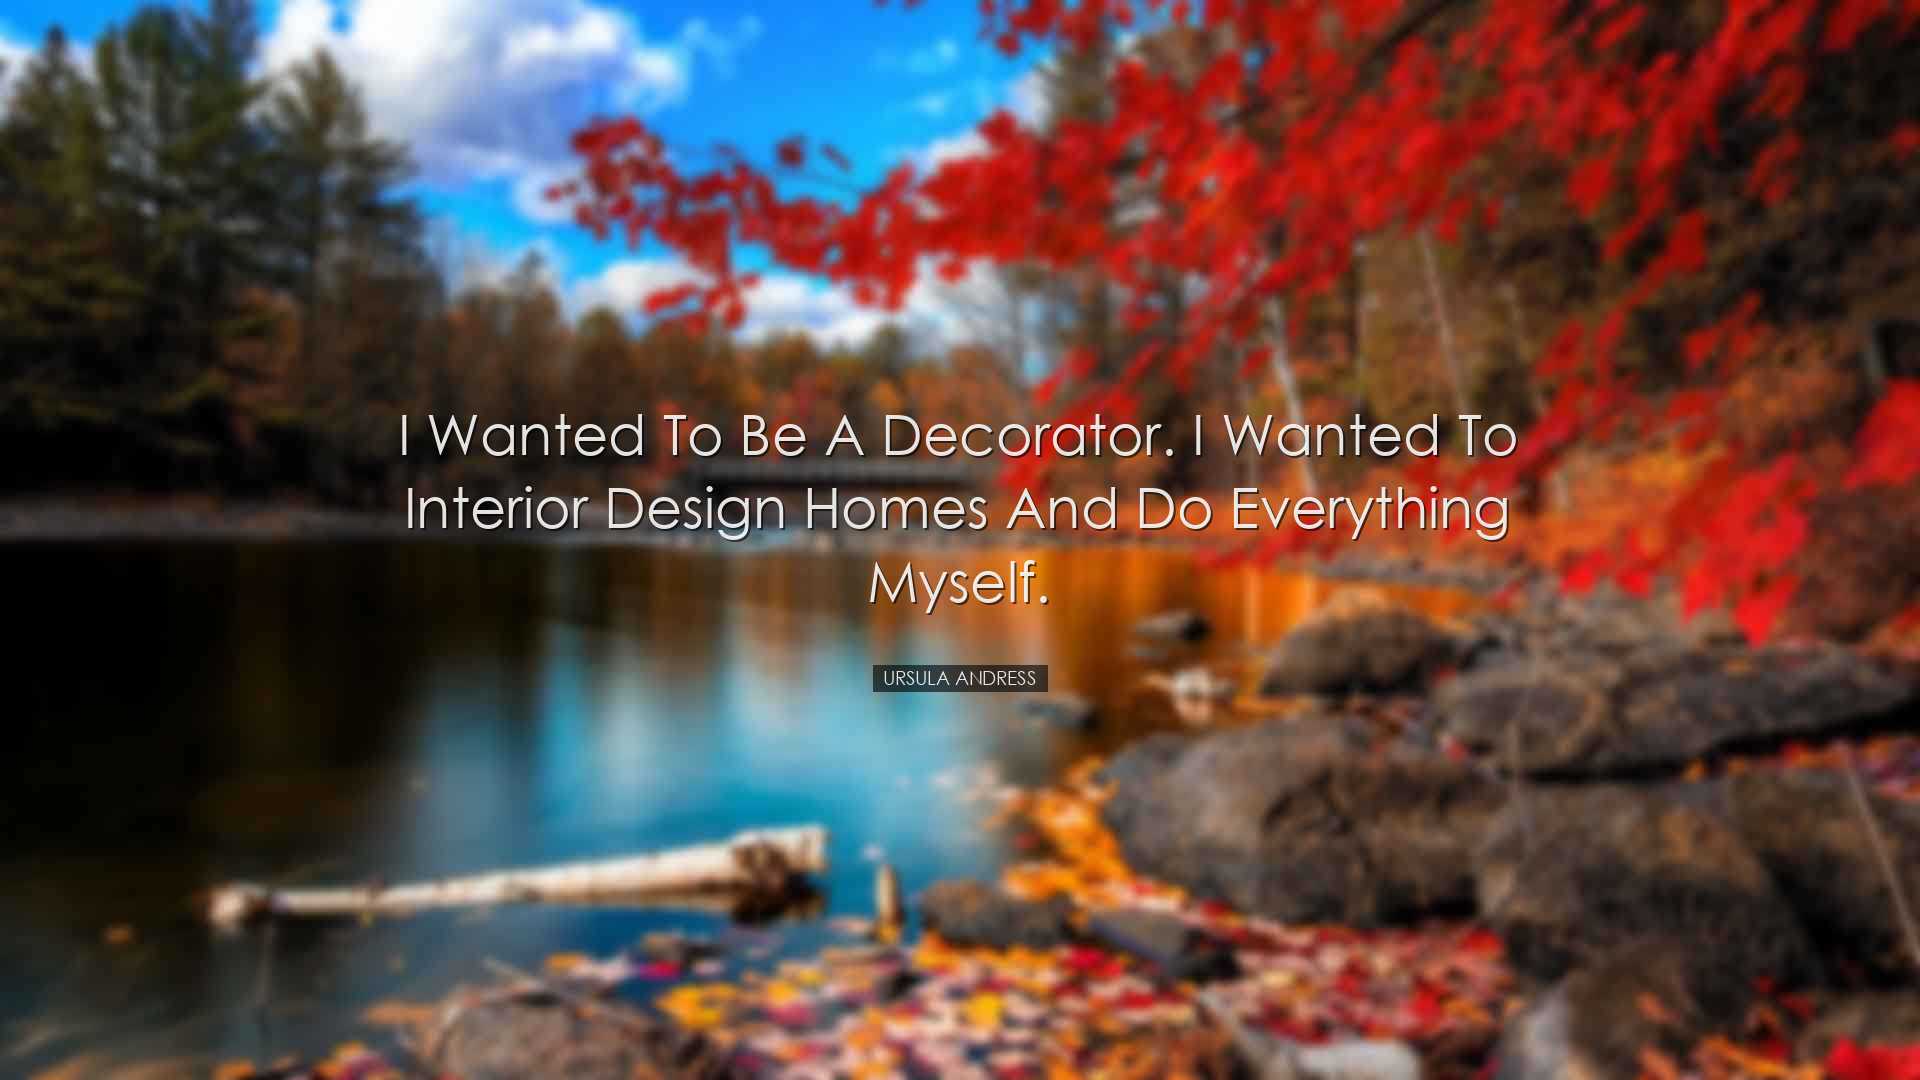 I wanted to be a decorator. I wanted to interior design homes and